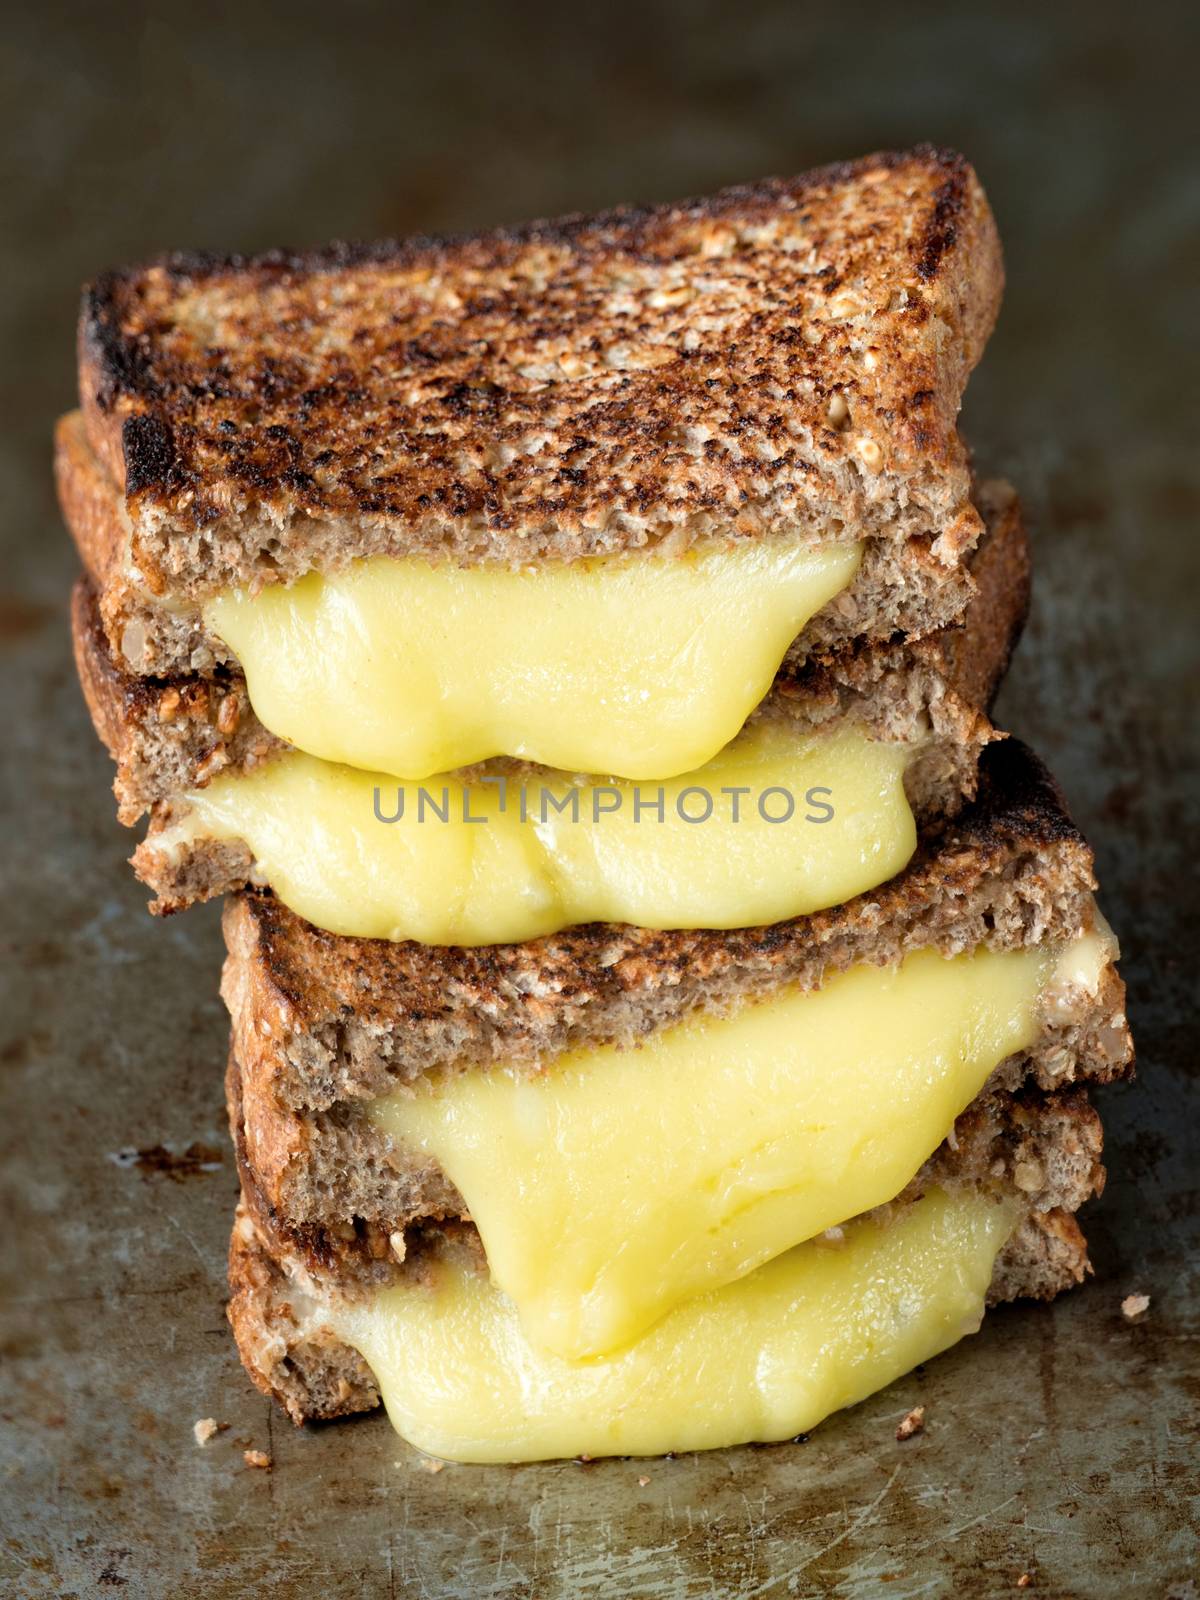 rustic american grilled cheese sandwich by zkruger